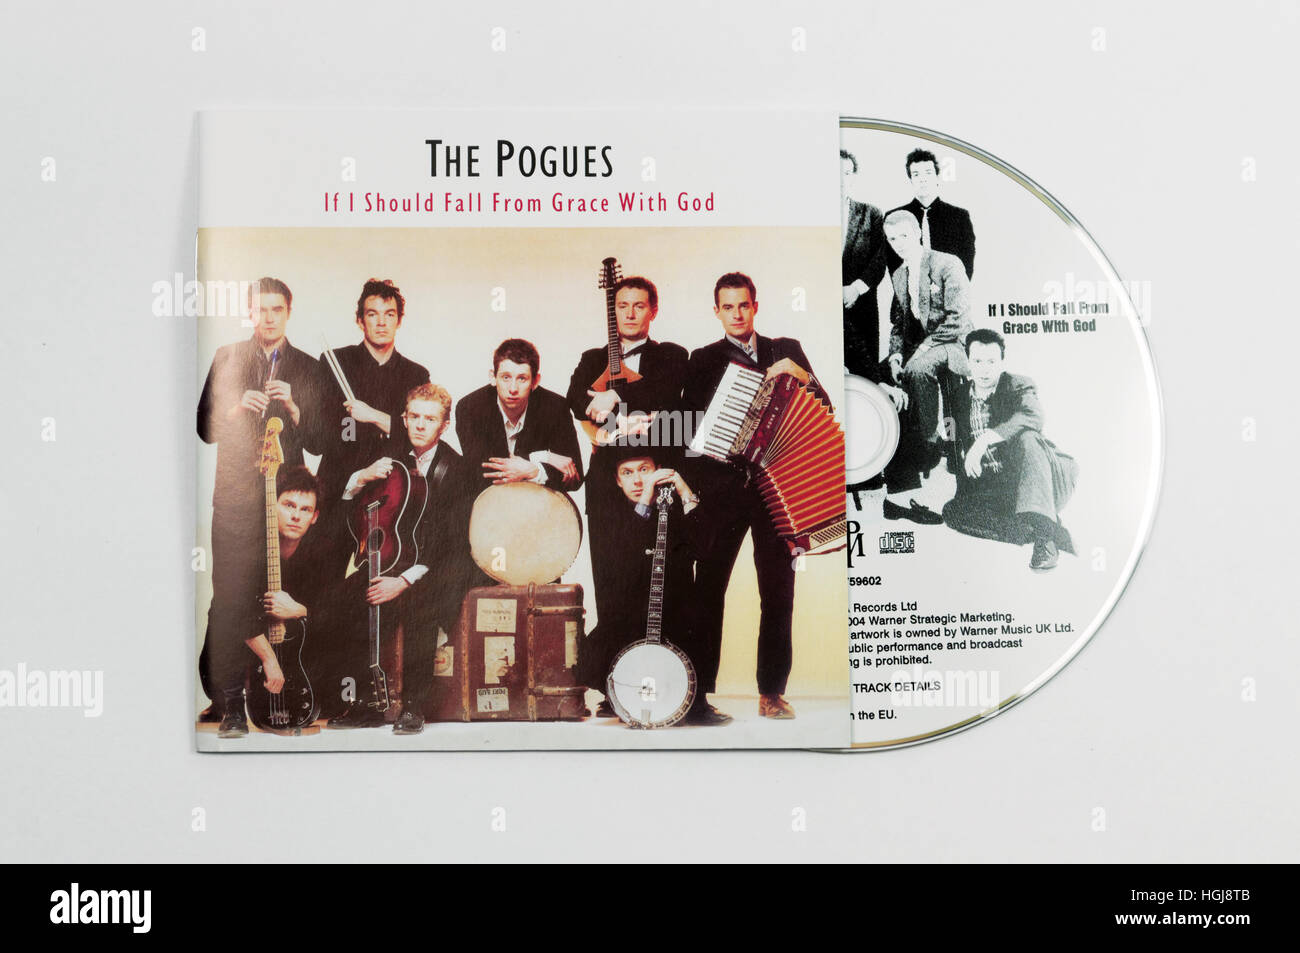 Die Pogues 'If I from Grace mit Gott Fall should"Album. Stockfoto